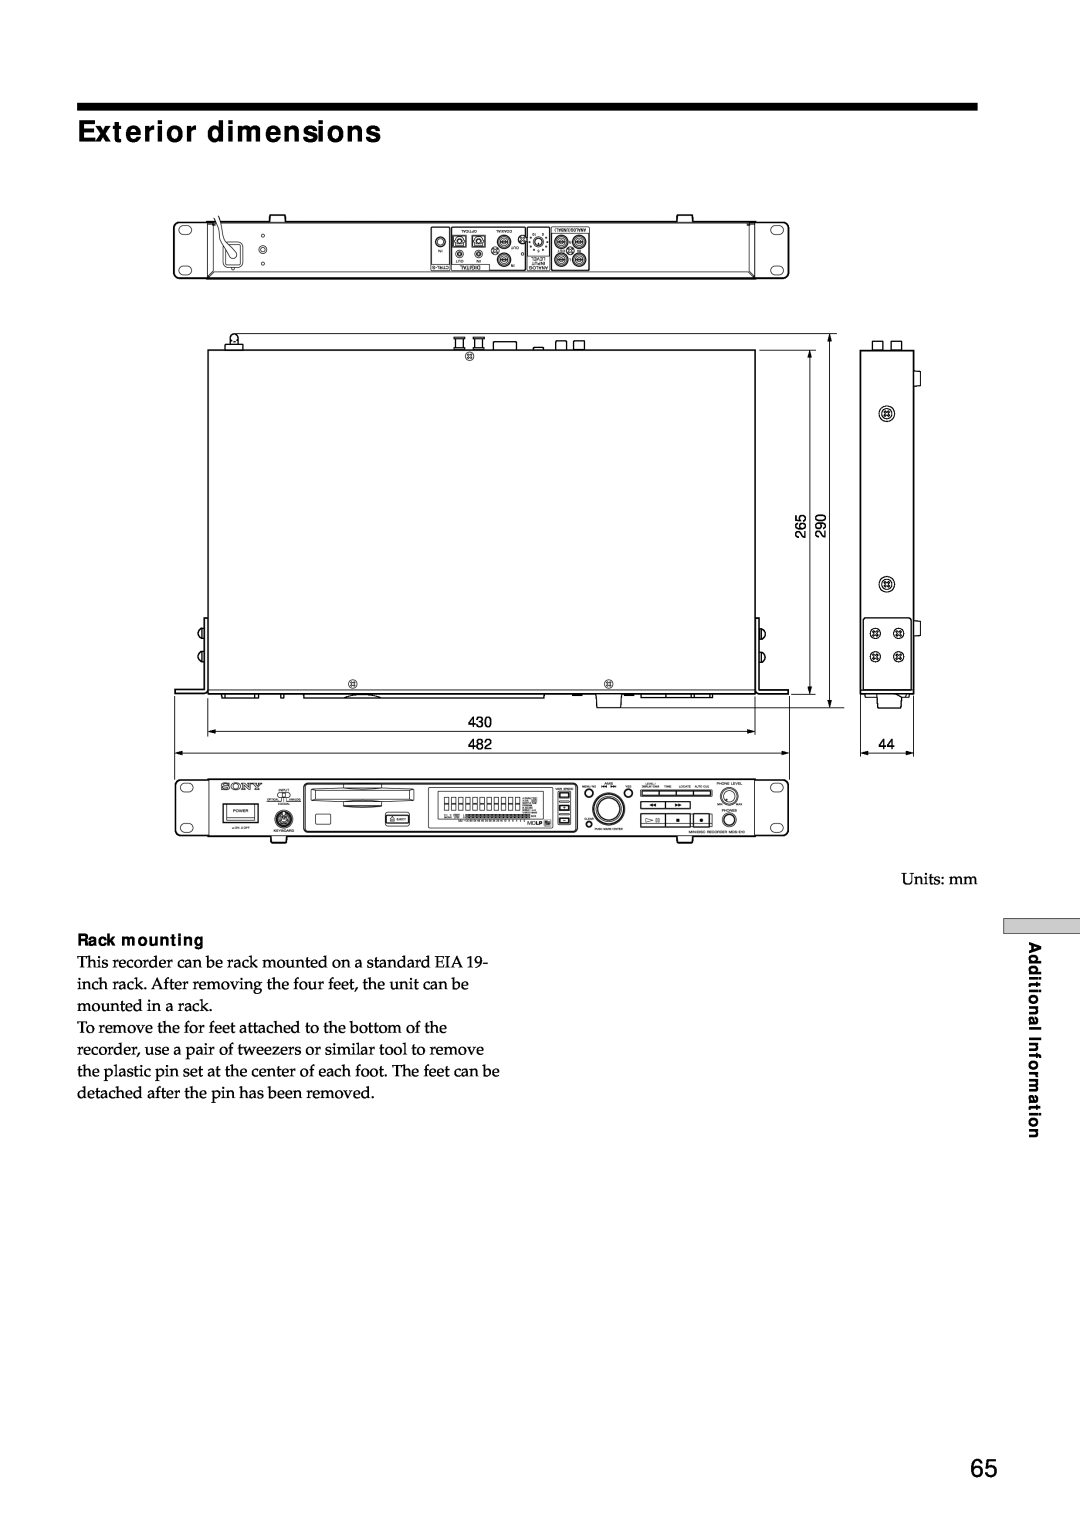 Sony MDS-E10 manual Exterior dimensions, Rack mounting, Additional Information 